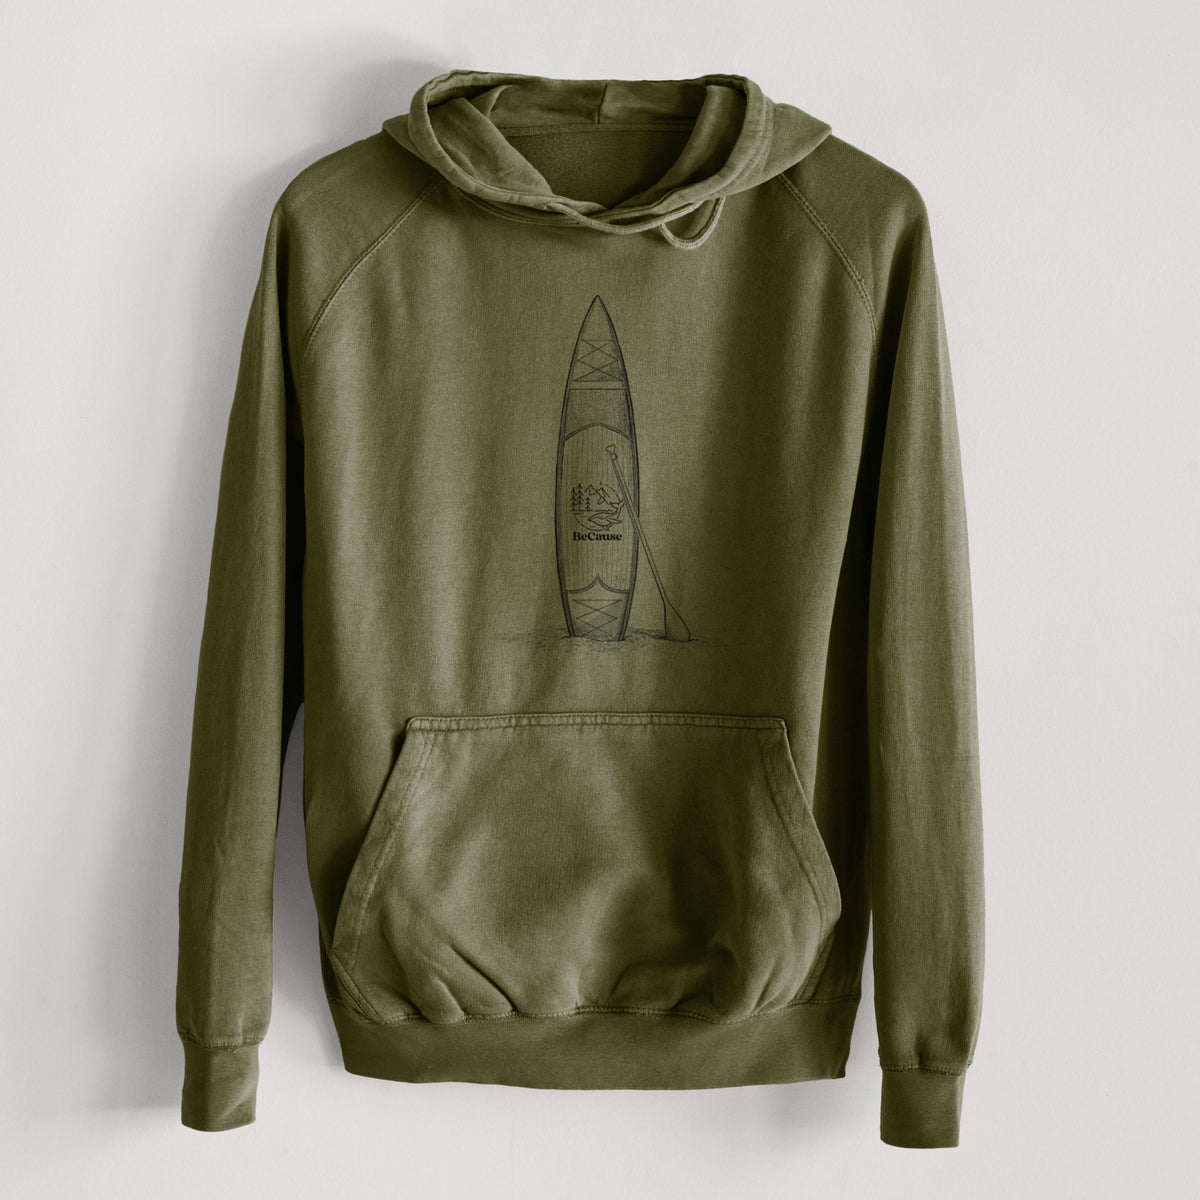 Stand-up Paddle Board  - Mid-Weight Unisex Vintage 100% Cotton Hoodie